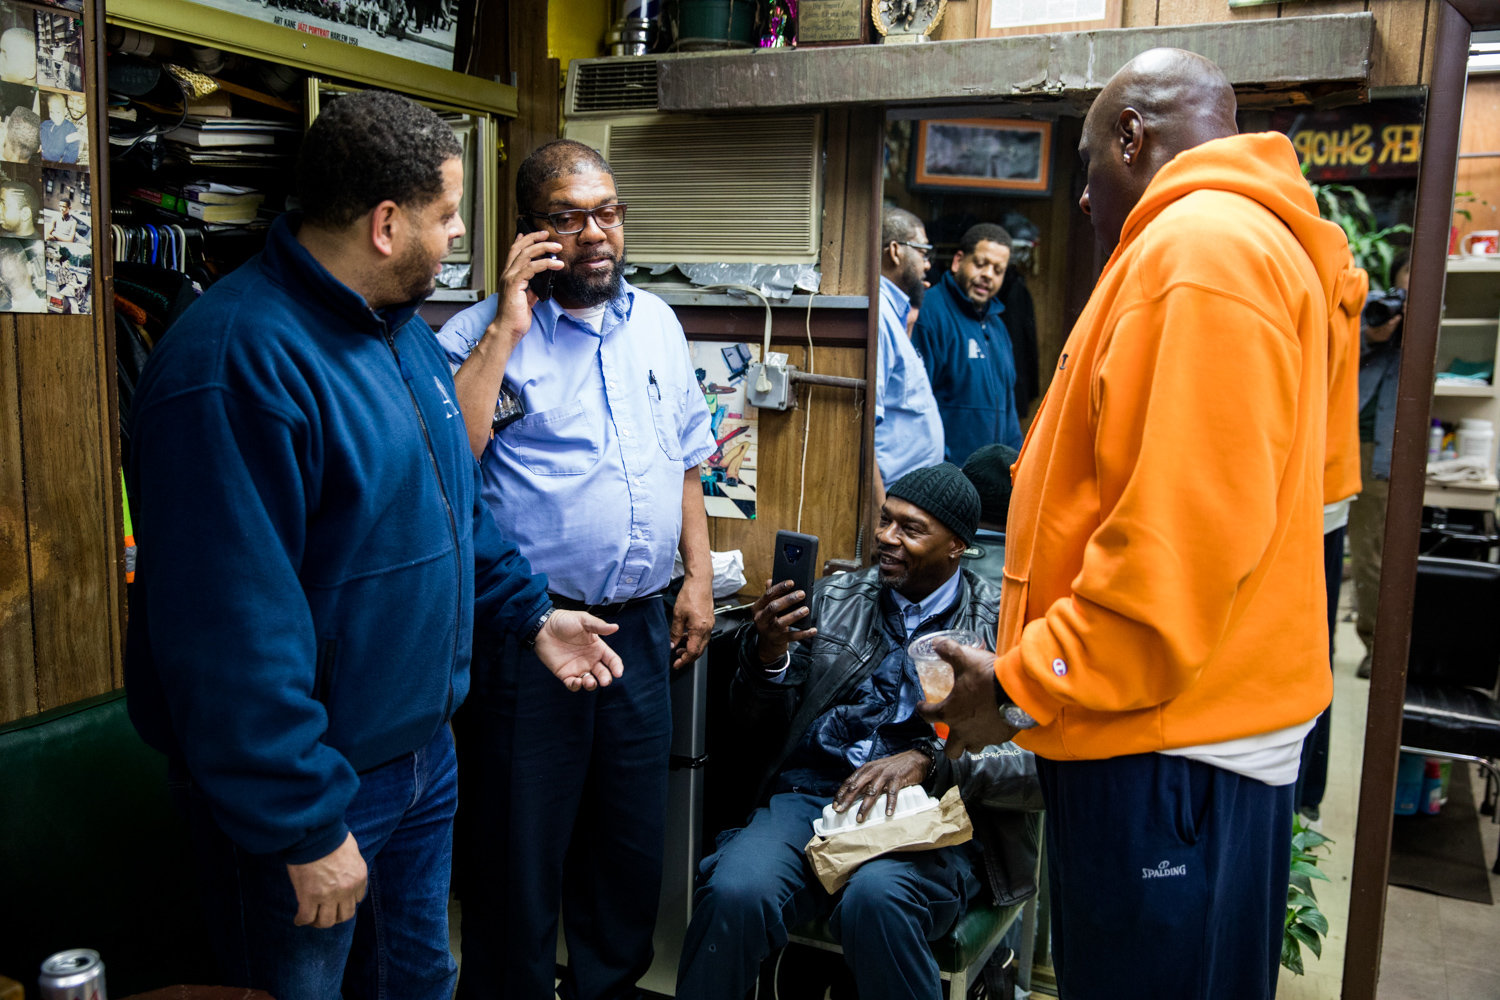 Walter Watson, second from left, talks on the phone inside Marble Hill’s International Unisex Salon on March 6, where he was a longtime customer. The MTA bus driver would die from complications related to COVID-19 less than two months later at 55.